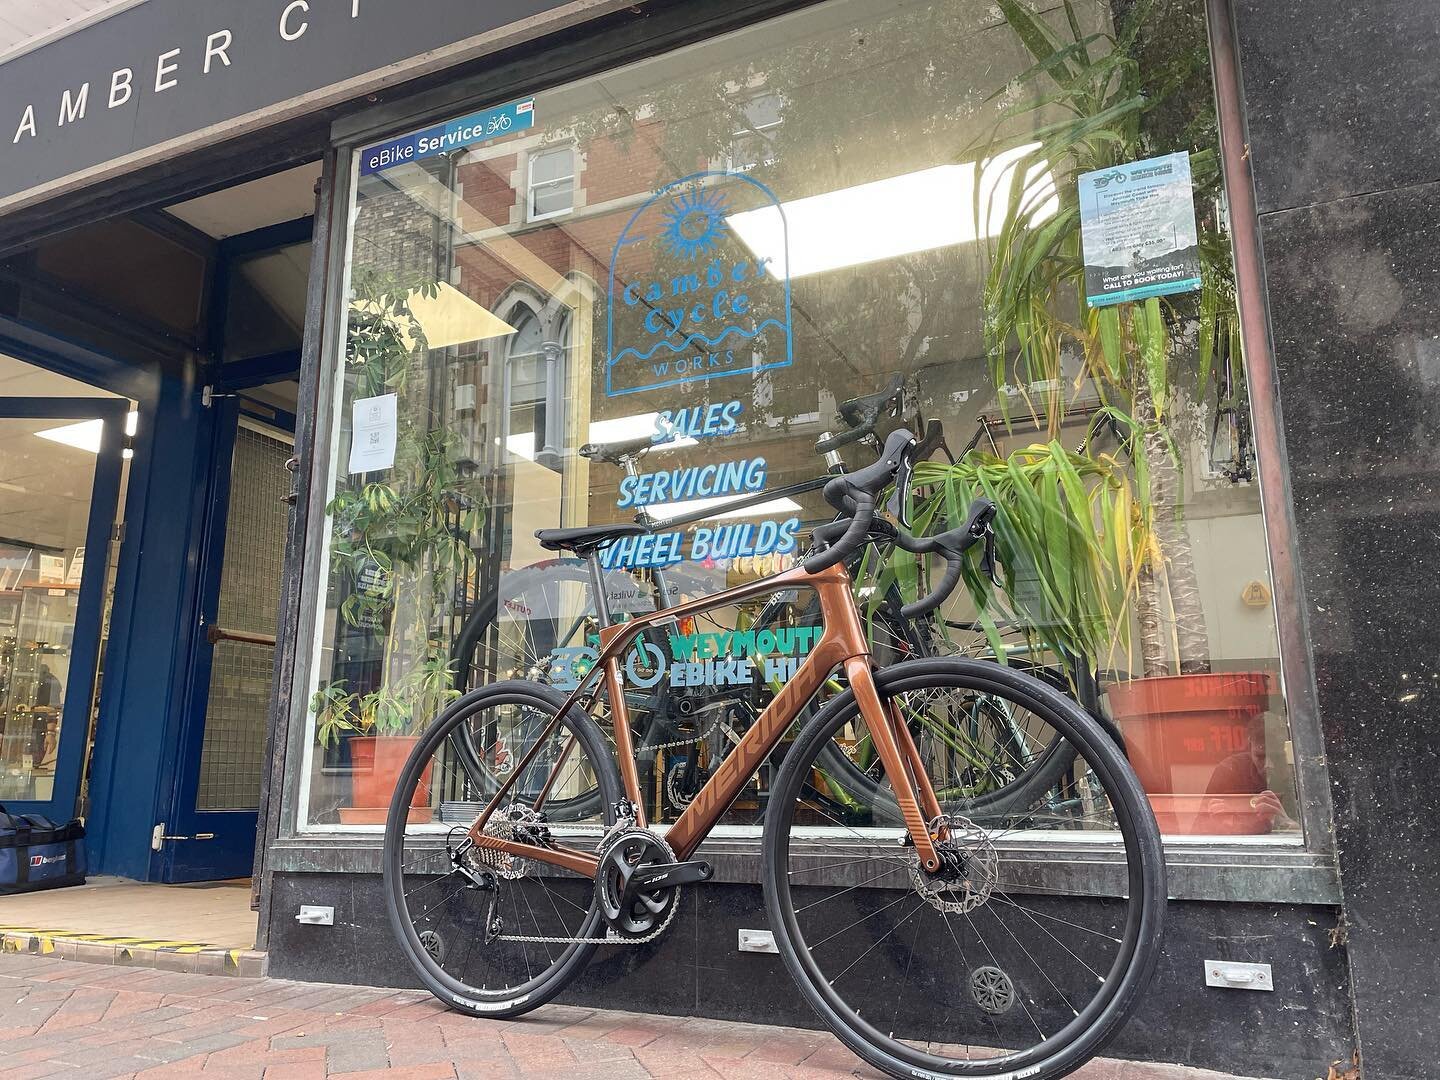 It&rsquo;s light, it&rsquo;s fast, it&rsquo;s comfortable, and it&rsquo;s brown!

Well, it&rsquo;s bronze actually, and it looks pretty sweet in the flesh. Off to a new home, @merida.bikes Scultura Endurance 4000, carbon frame and fork, full @rideshi